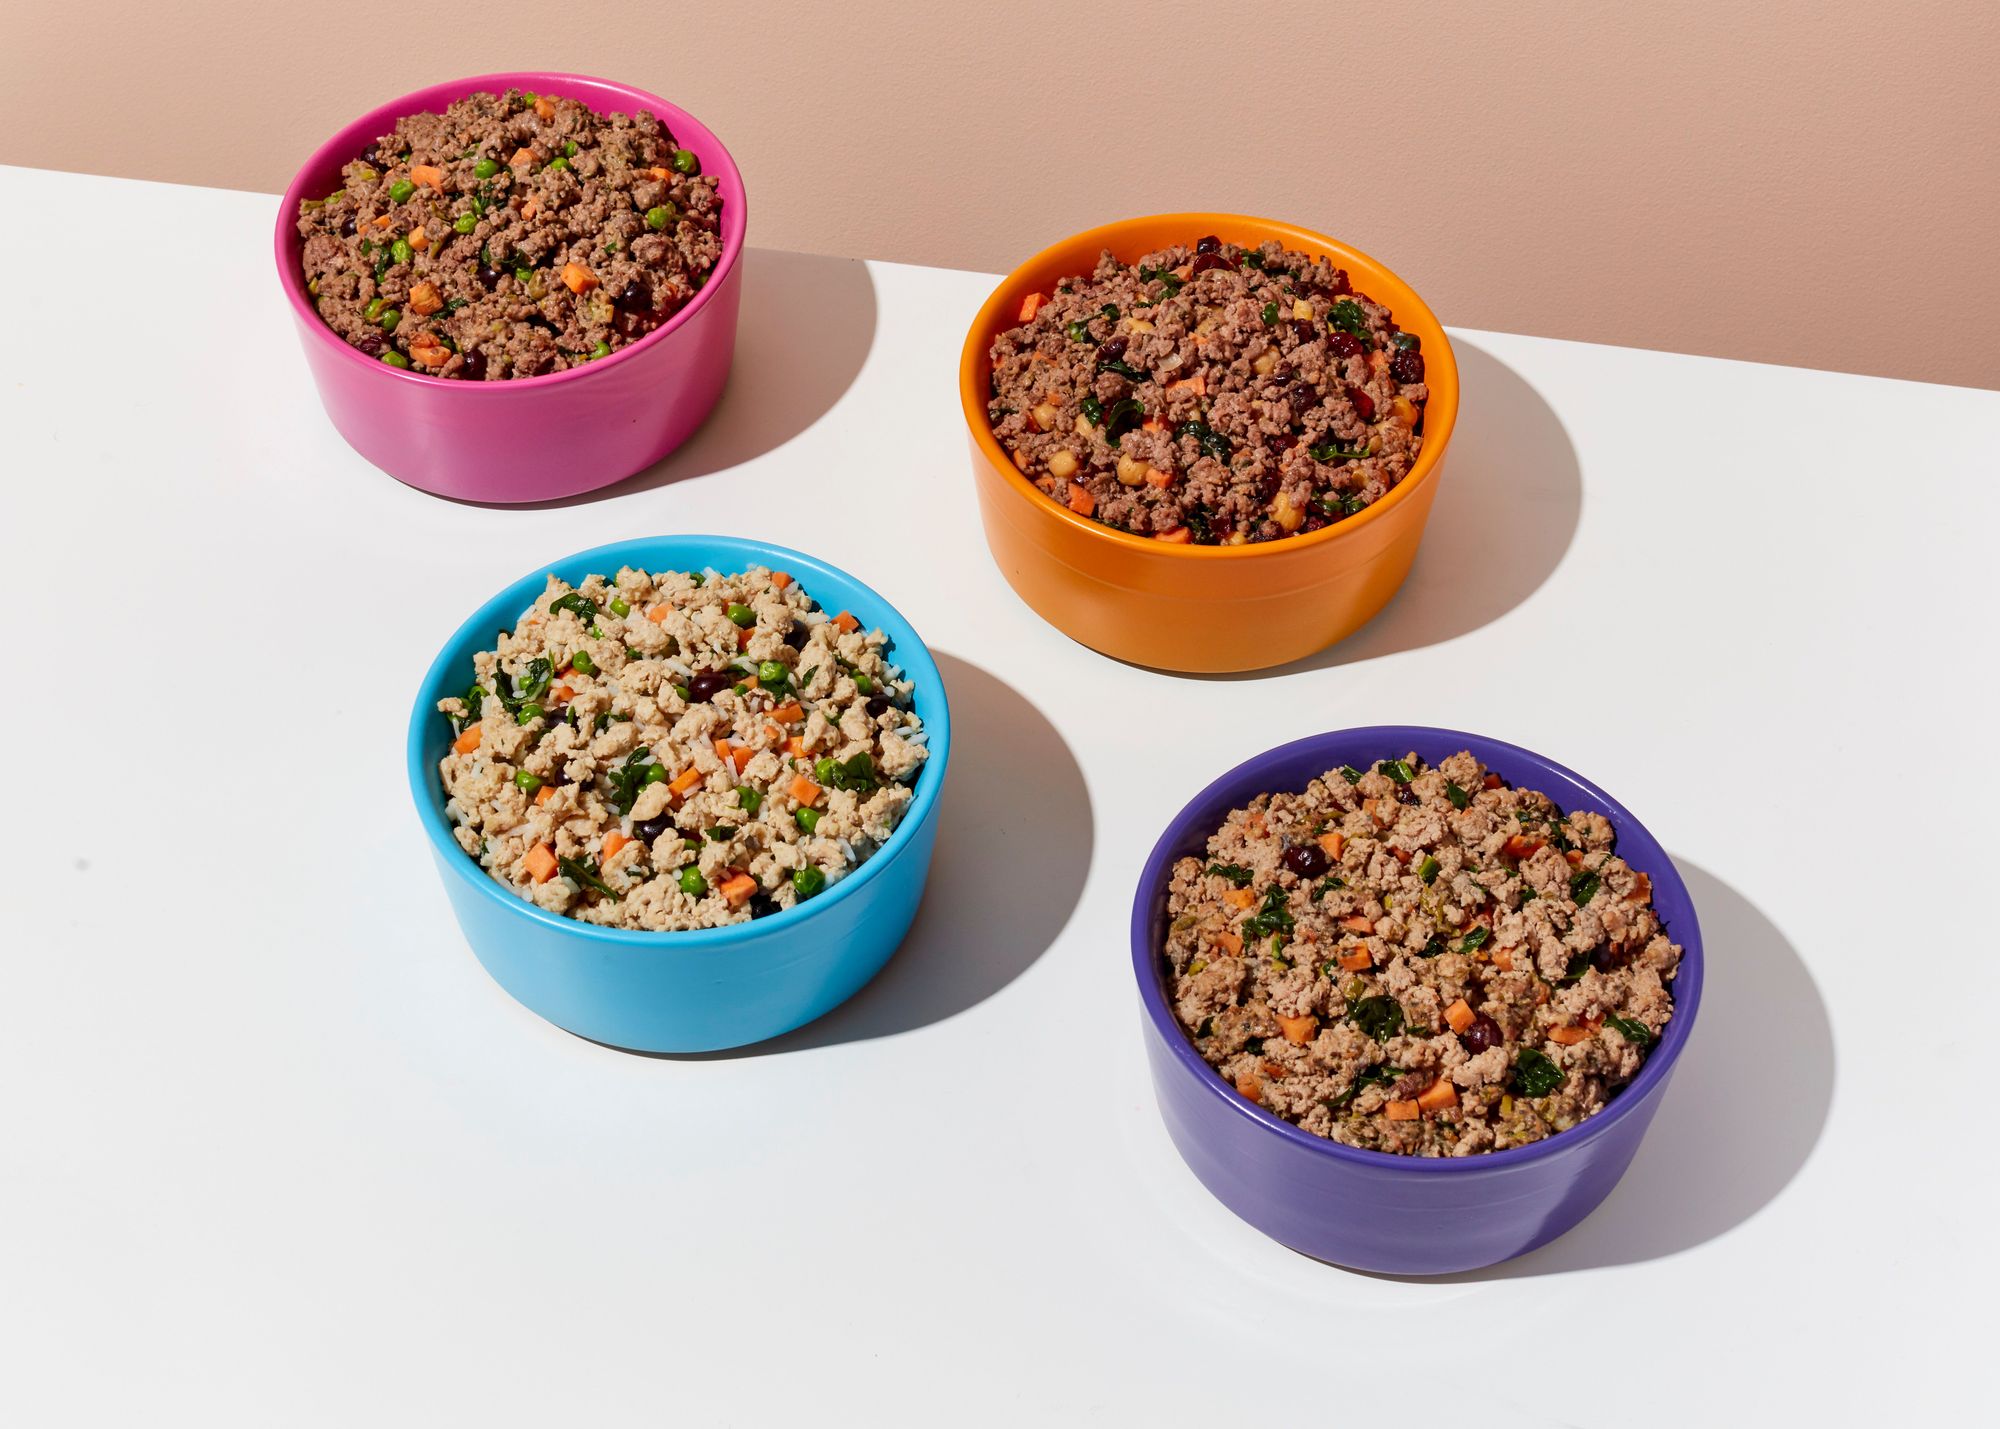 ollie-fresh-dog-food-in-colorful-bowls-on-white-table